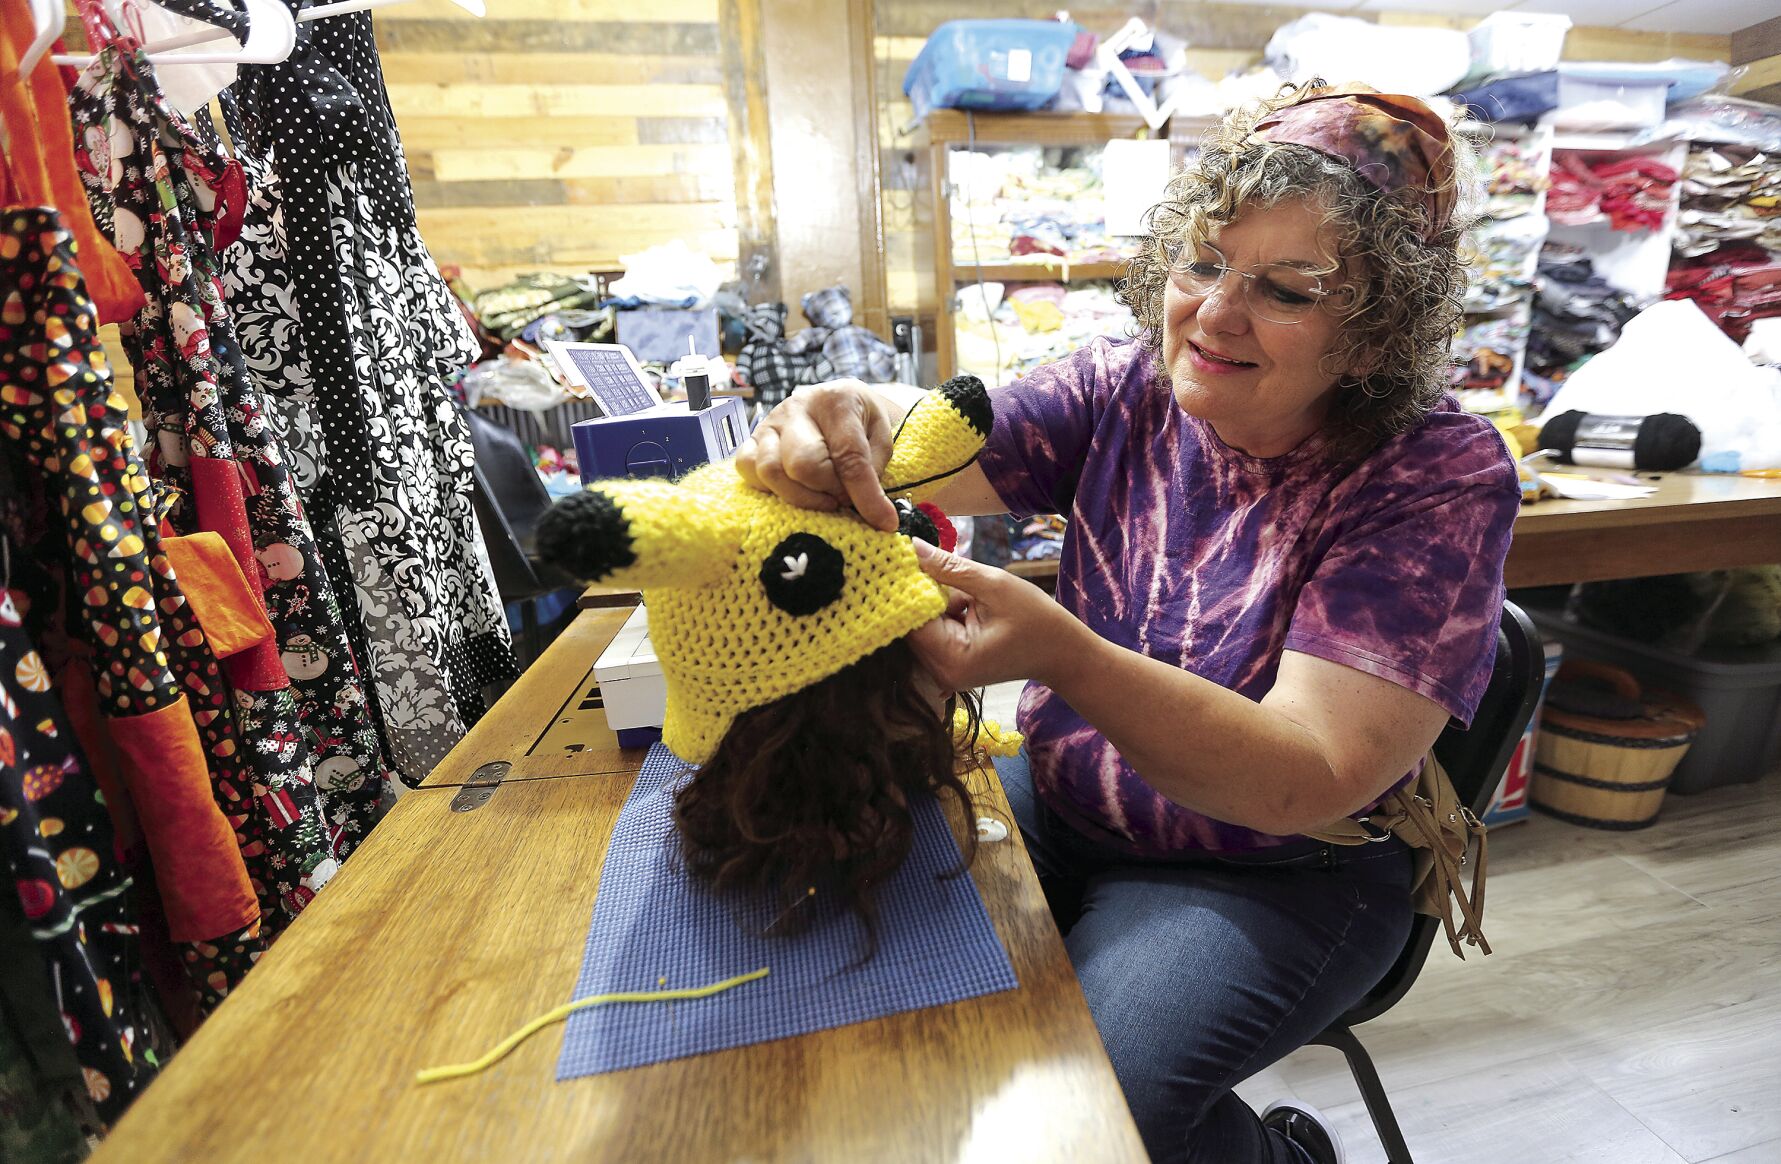 Annie Heinze, owner of Annie’s Heirlooms, works on making a hat in her store on Elm Street in Dubuque.    PHOTO CREDIT: Dave Kettering